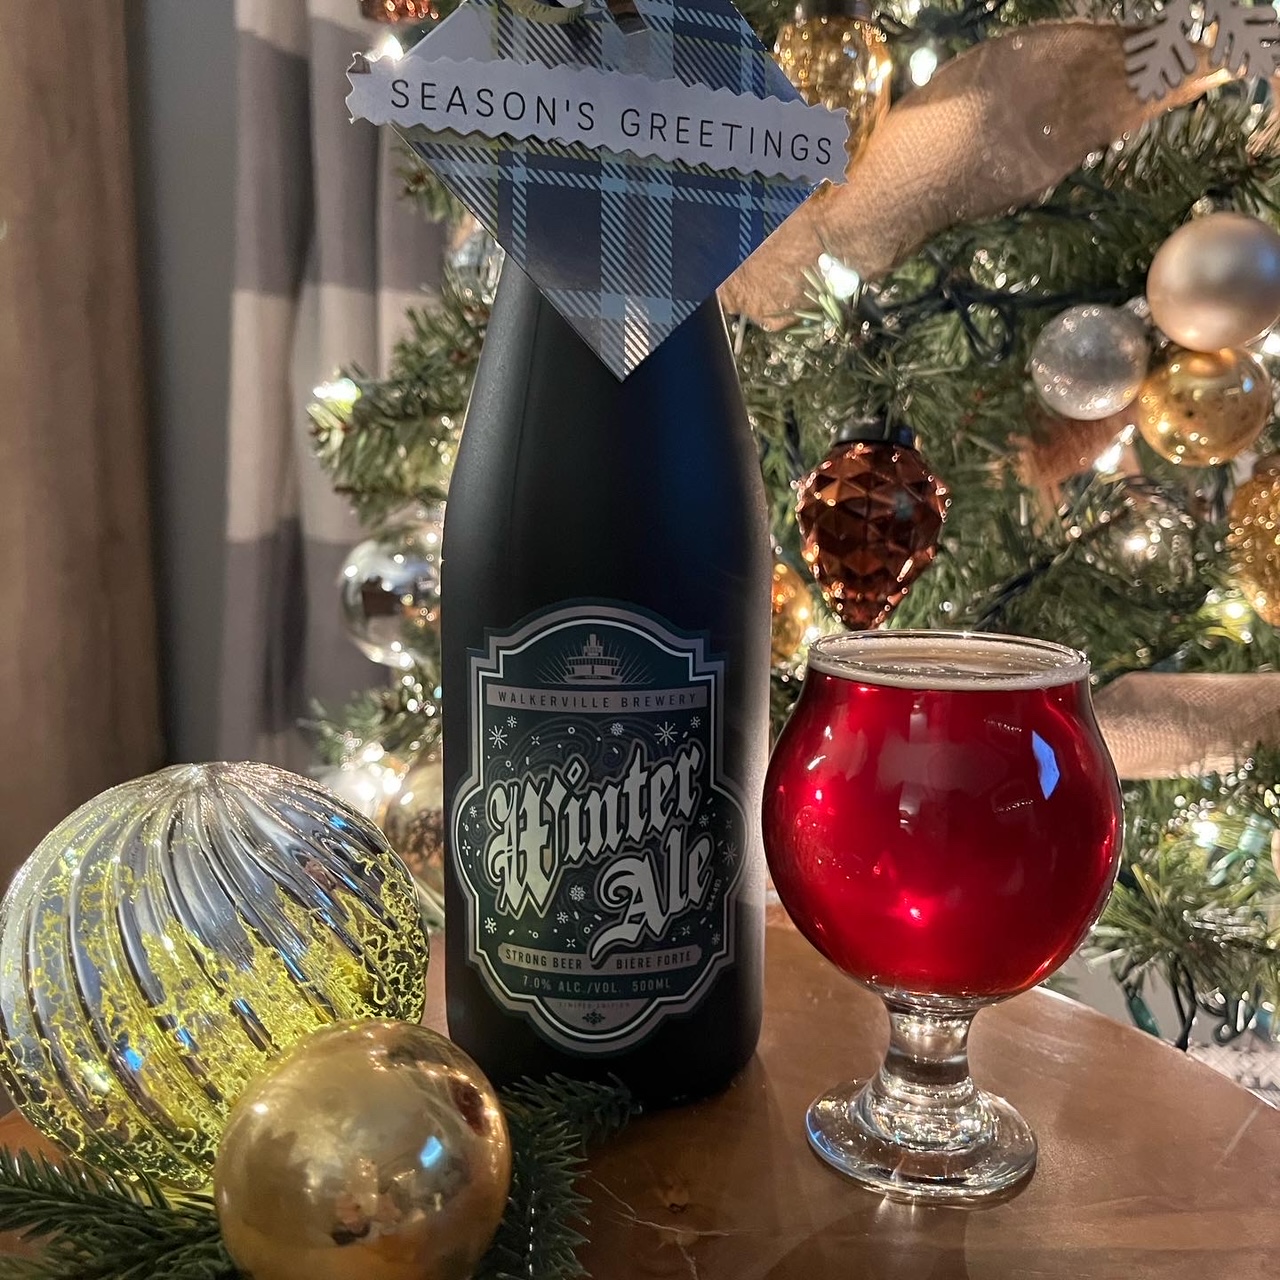 Featured image for “Walkerville Brewery Winter Ale with Family and Friends this Christmas Season.”